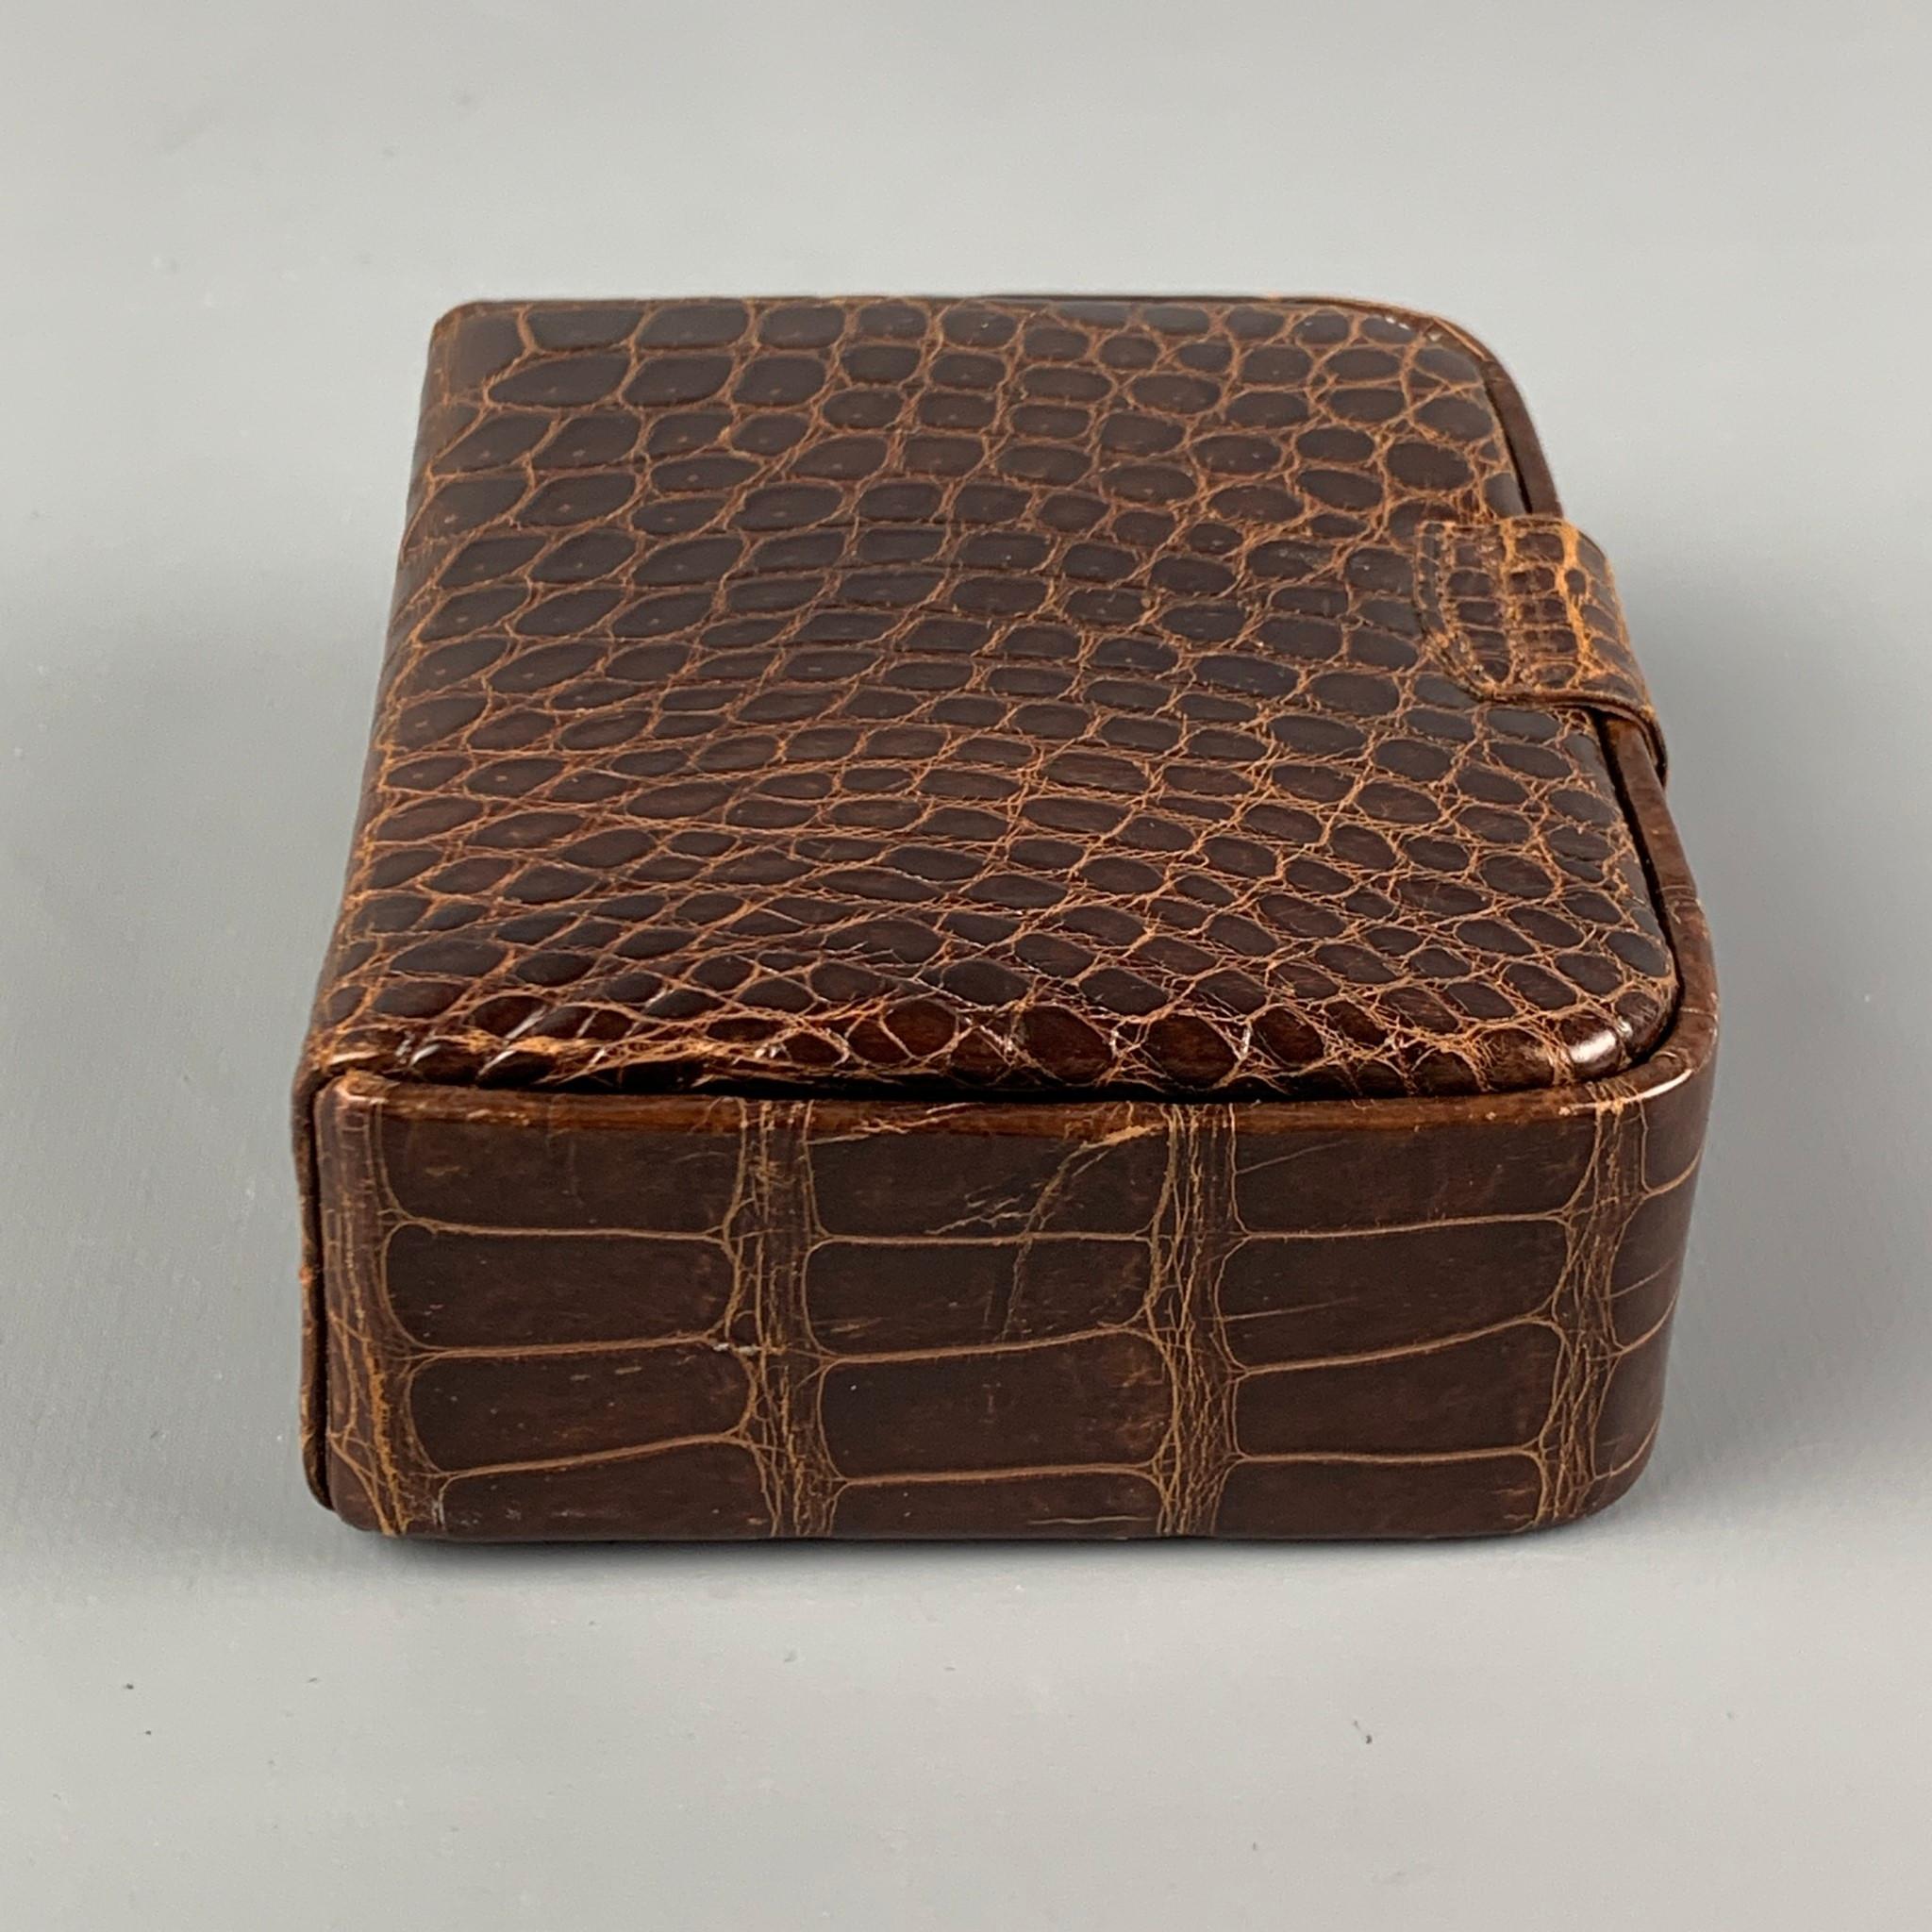 Vintage Vogue of Calif. jewelry case comes in a brown alligator featuring a snap button closure. 

Very Good Pre-Owned Condition.

Measurements:

Length: 4.5 in.
Height: 1.5 in. 